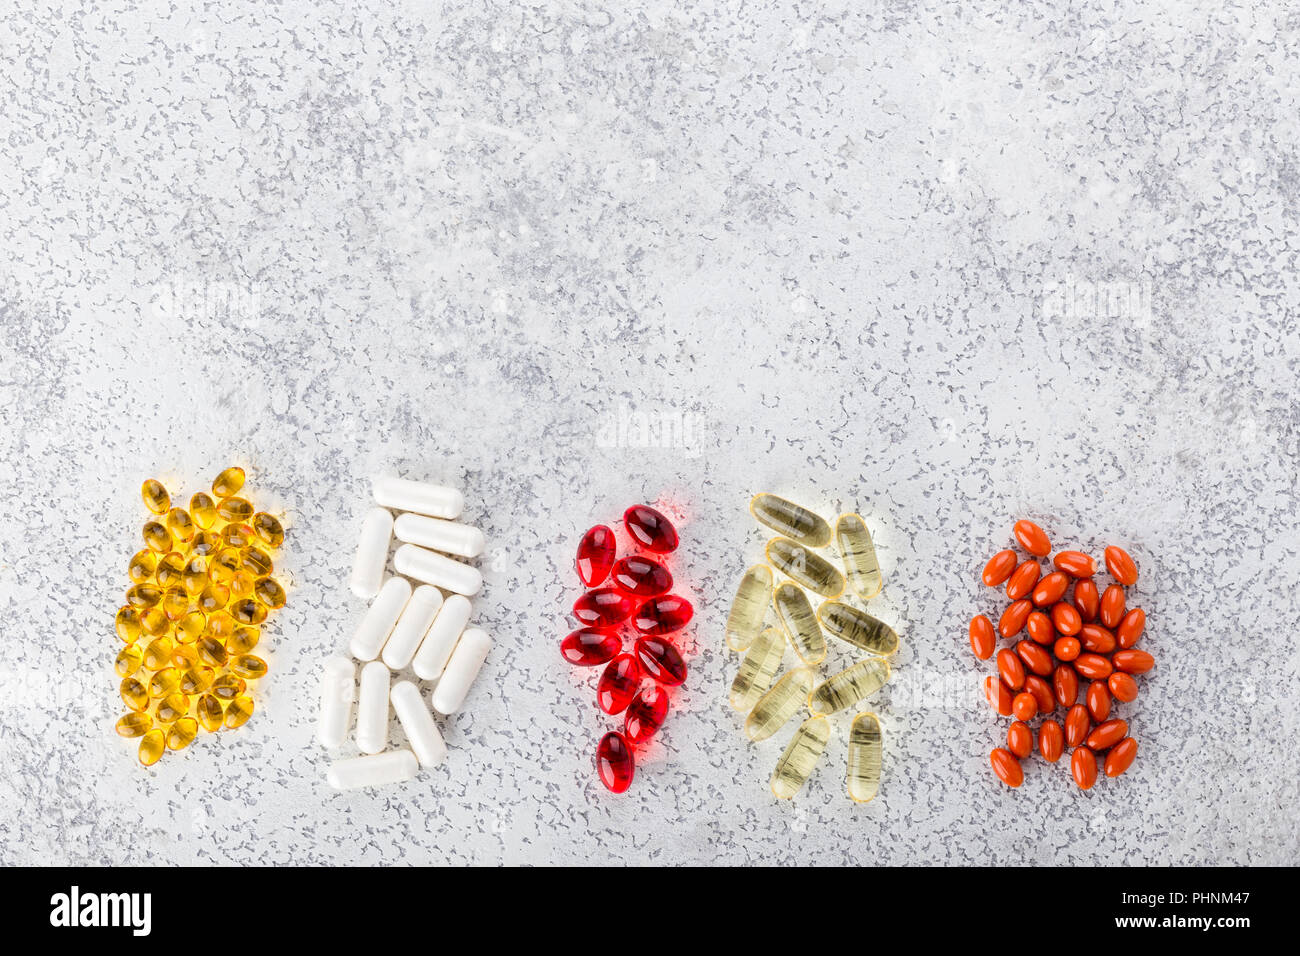 Medicine pills, tablets and capsules Stock Photo